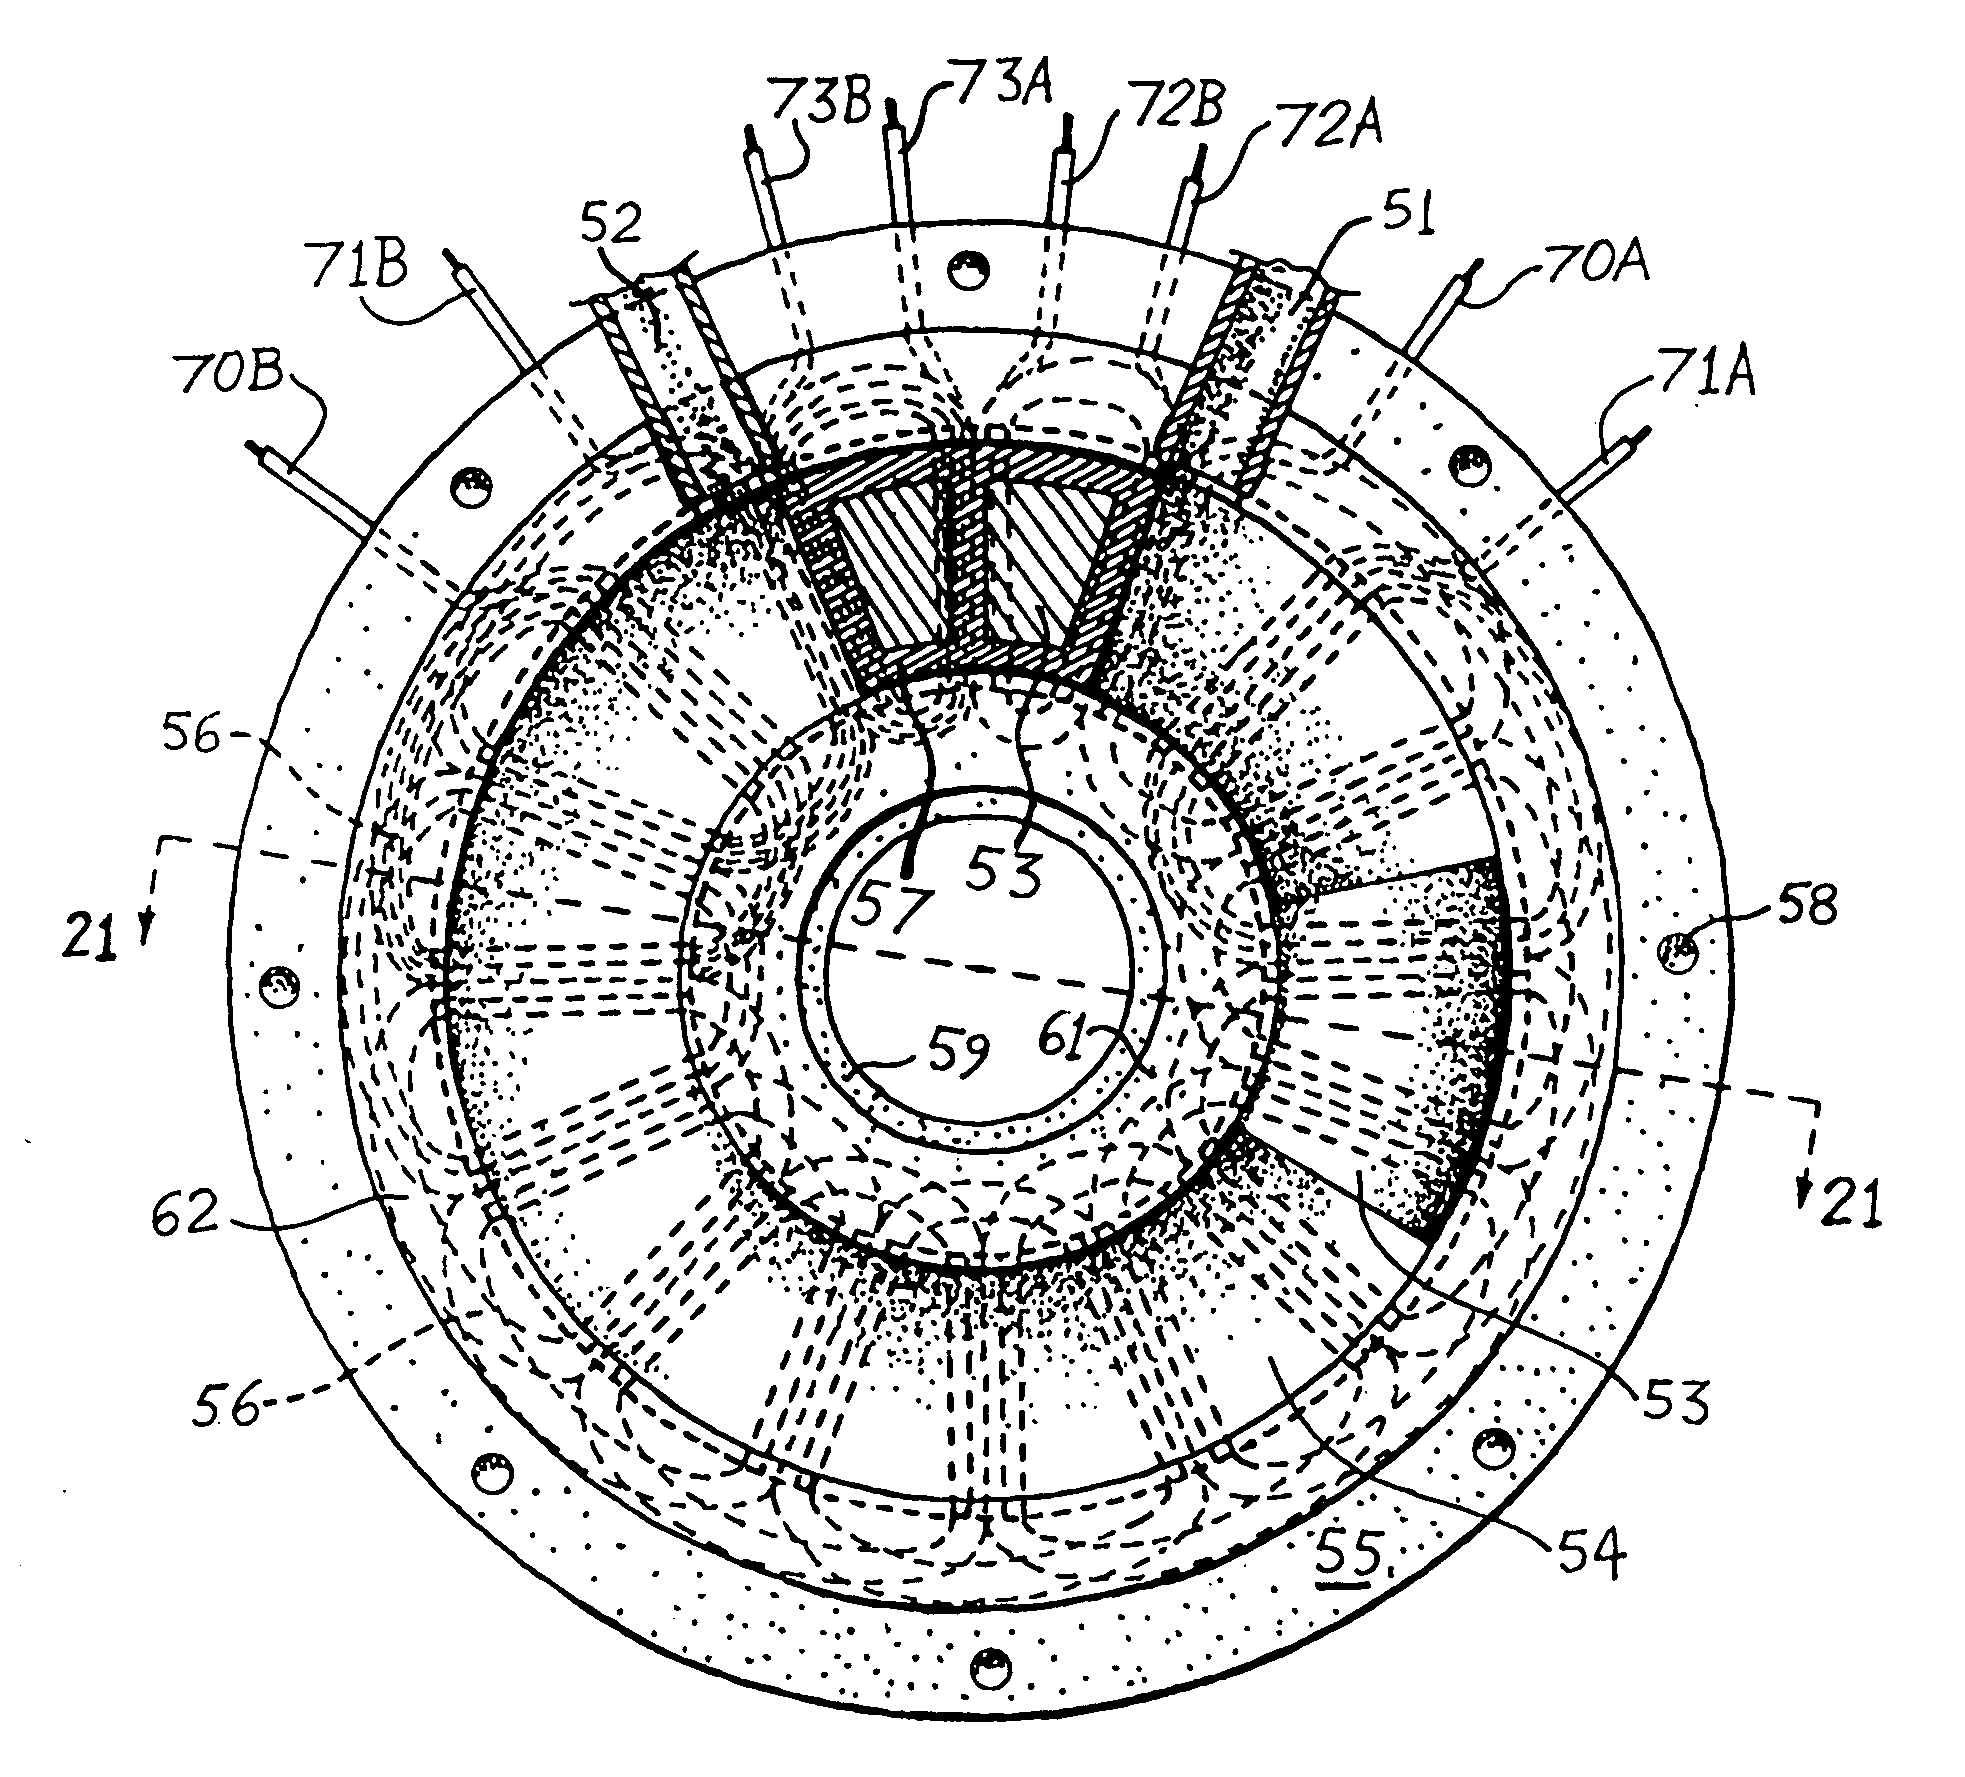 Relaying piston multiuse valve-less electromagnetically controlled energy conversion devices